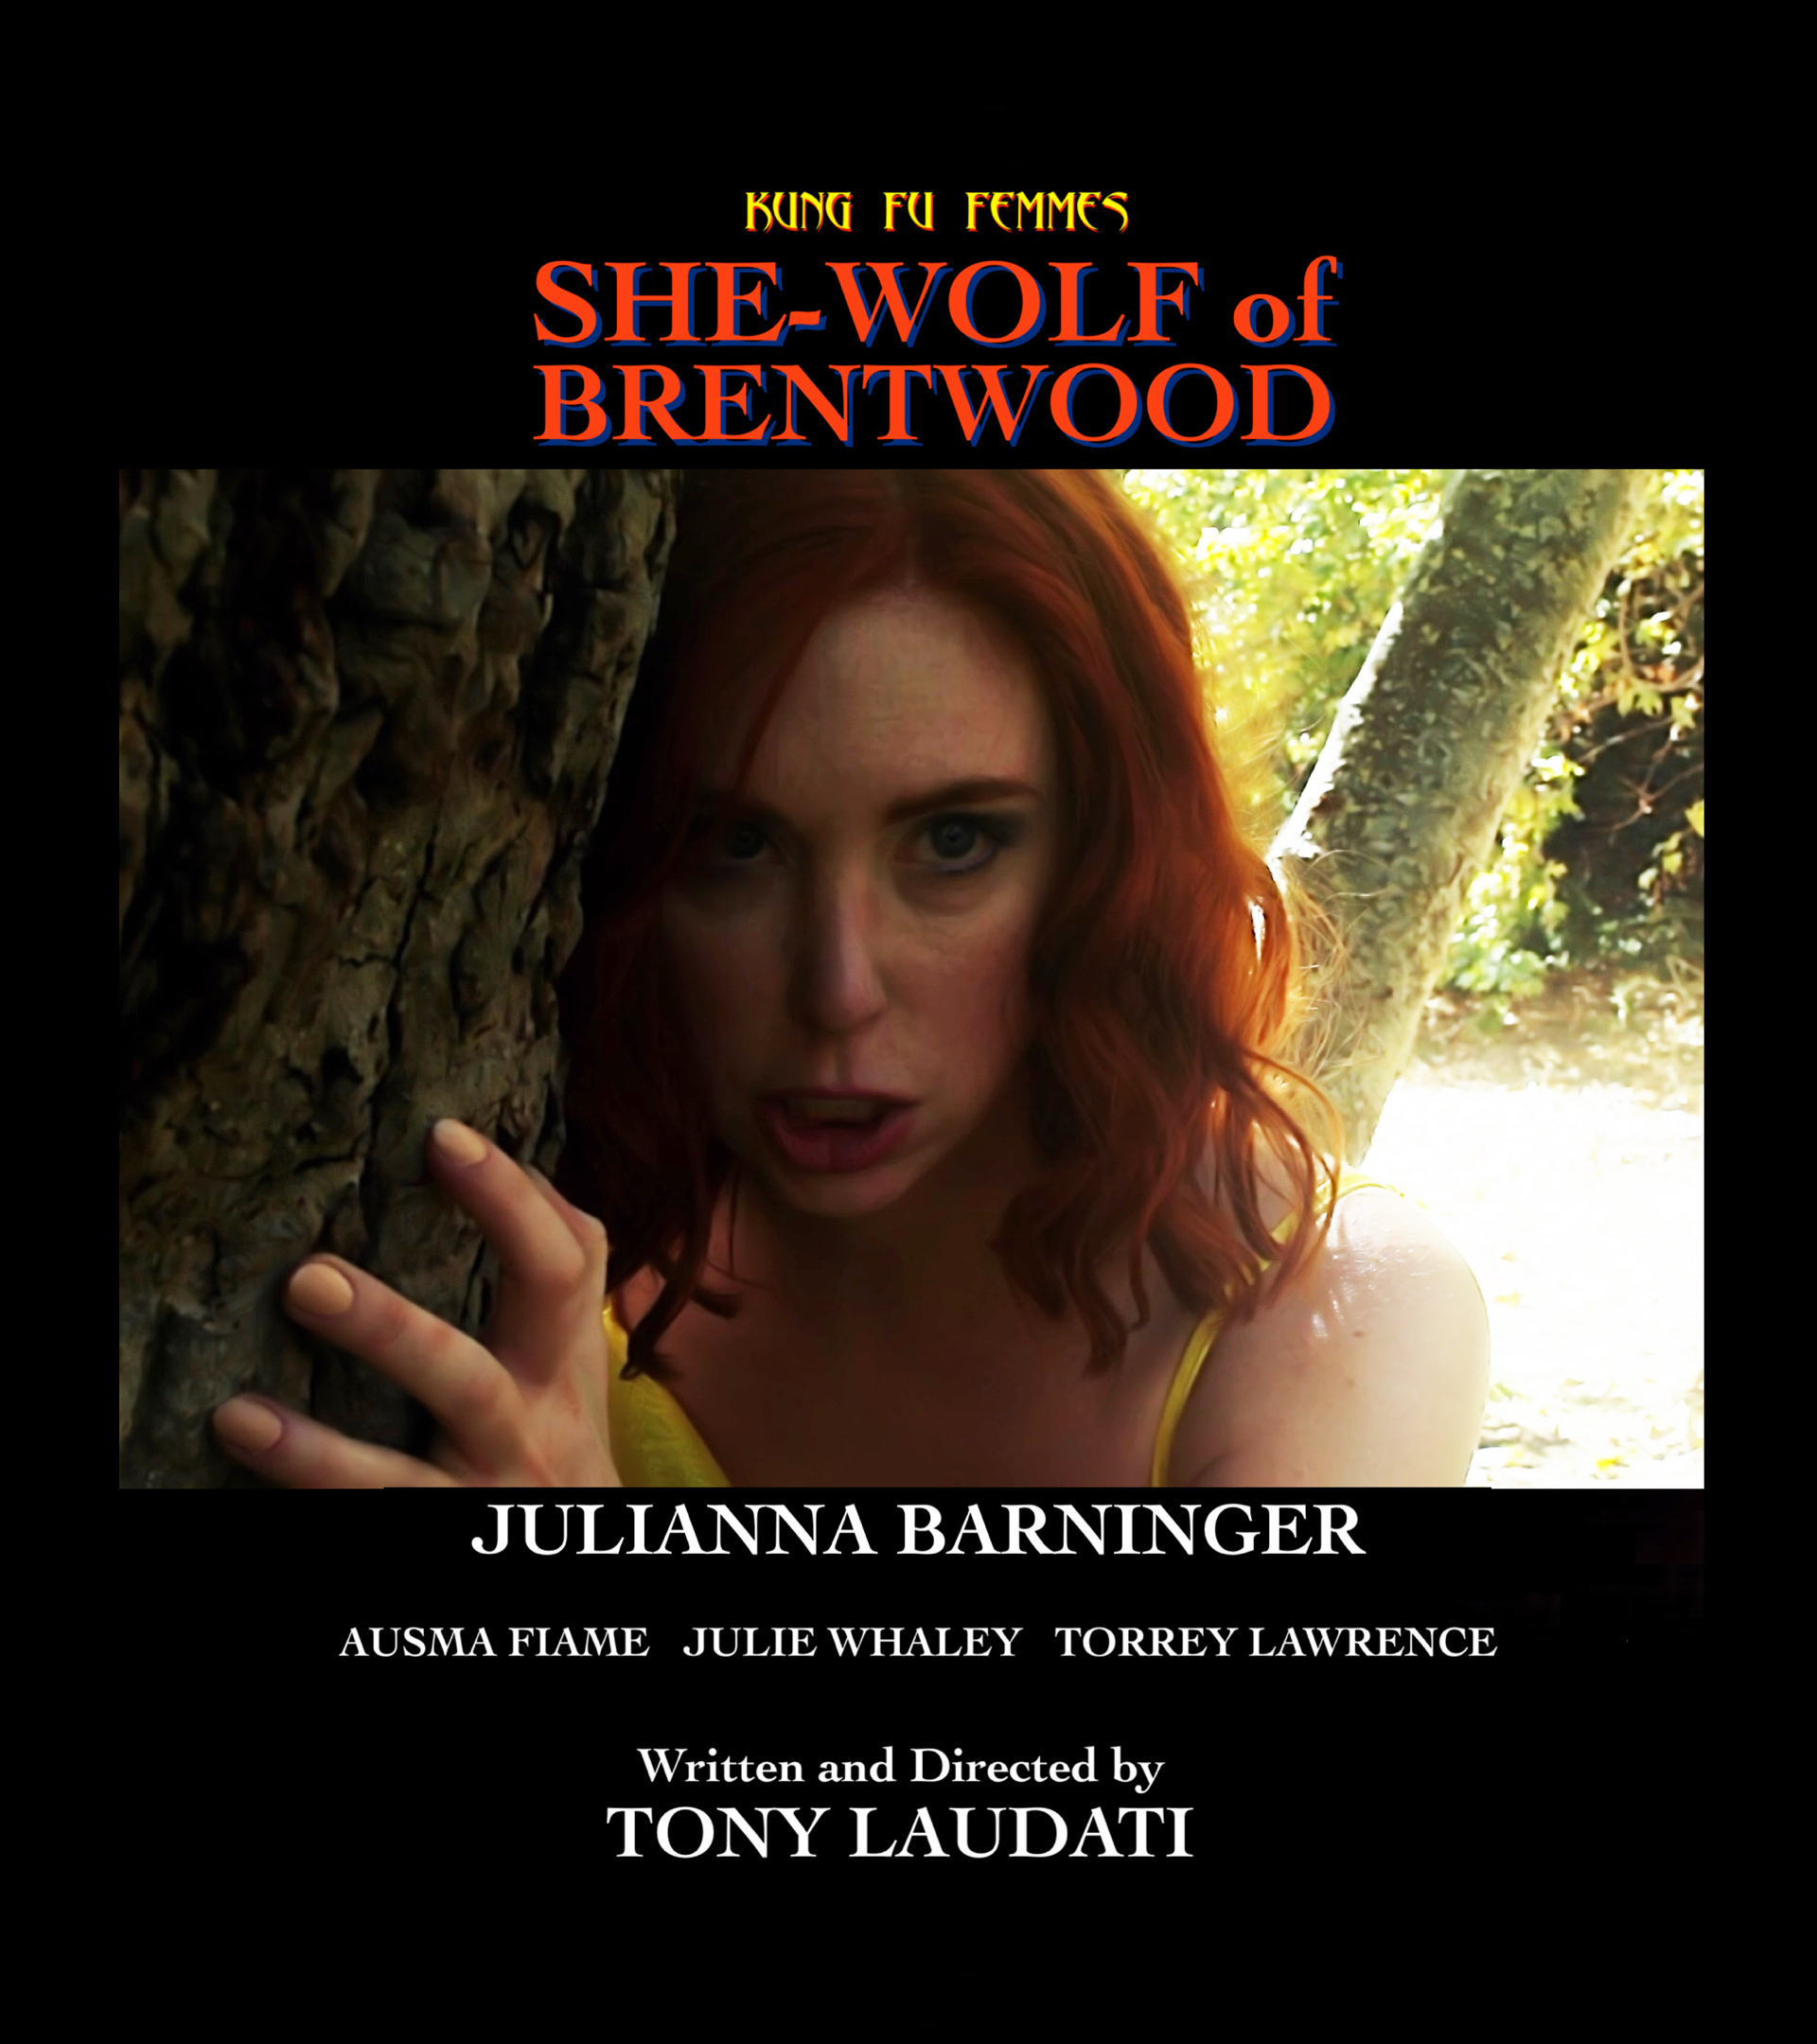 She-Wolf of Brentwood